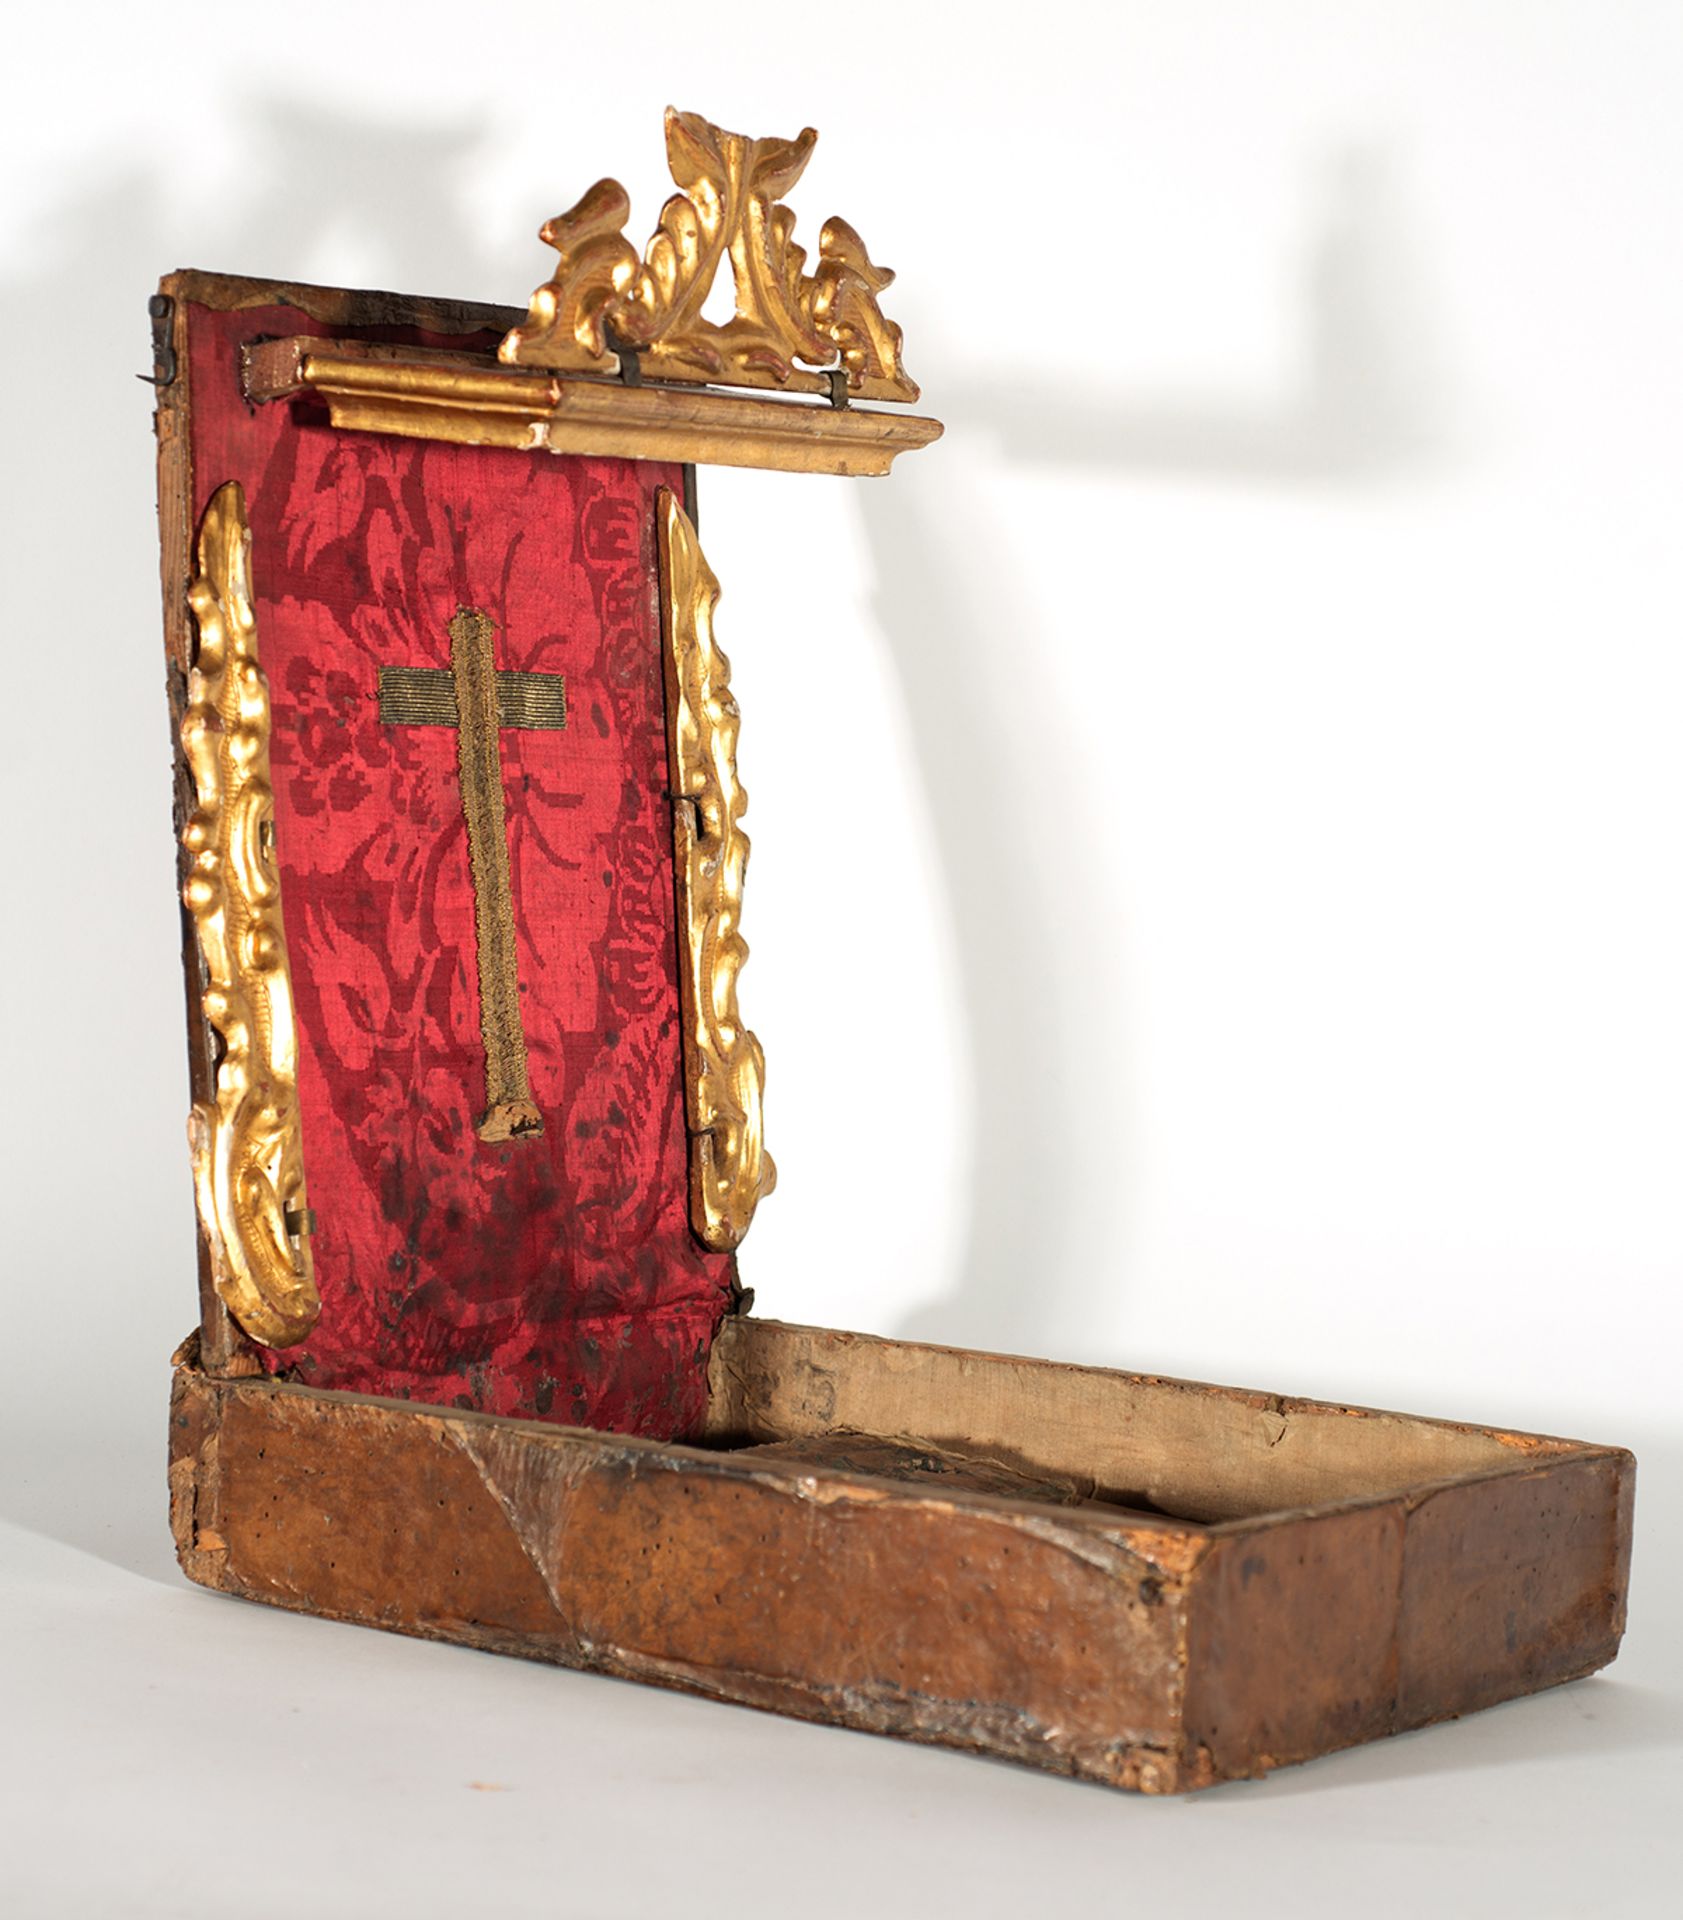 Portable altar, Spain, 17th century - Image 3 of 4